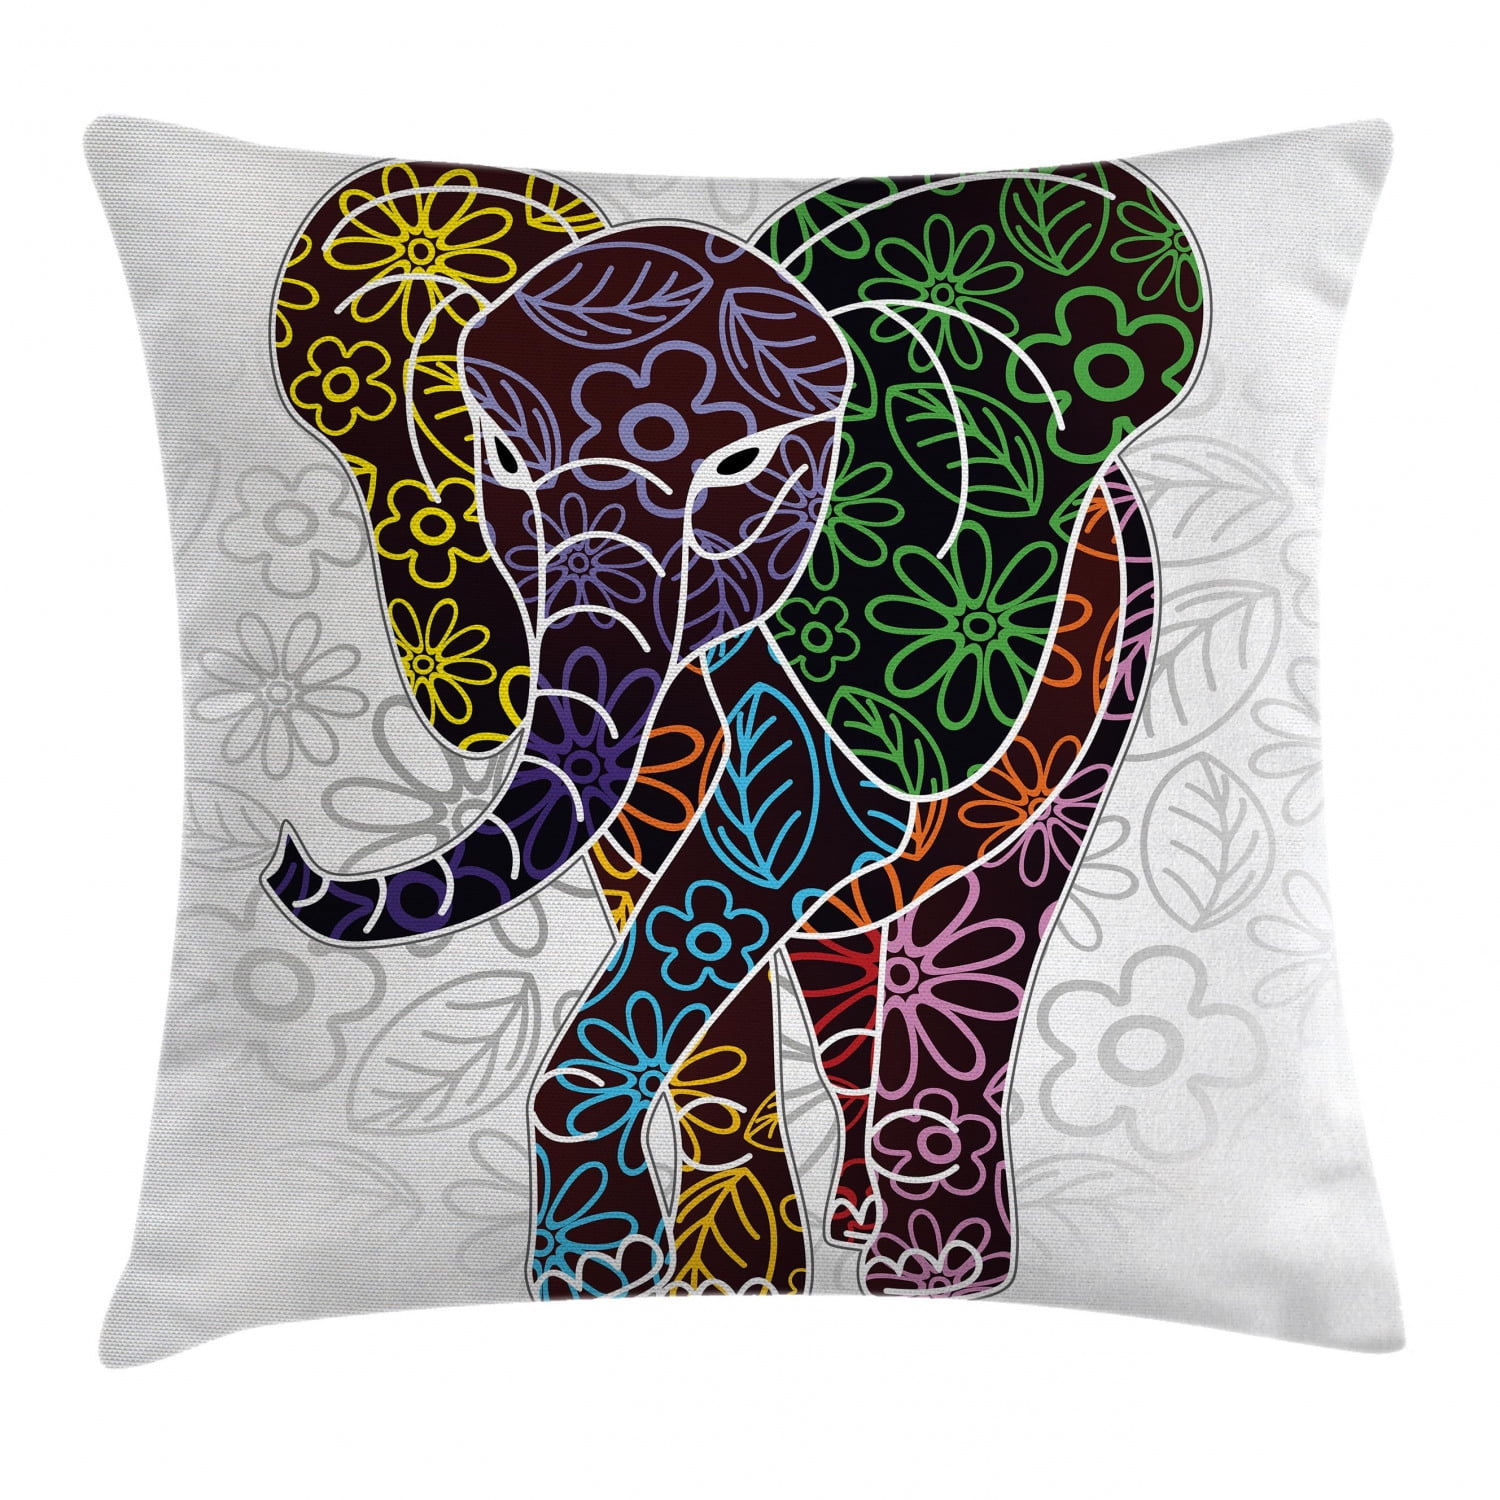 Elephant Cushion 45X45cmExtra Large Floor Pillow Cover Square Pet Dog Bed Covers